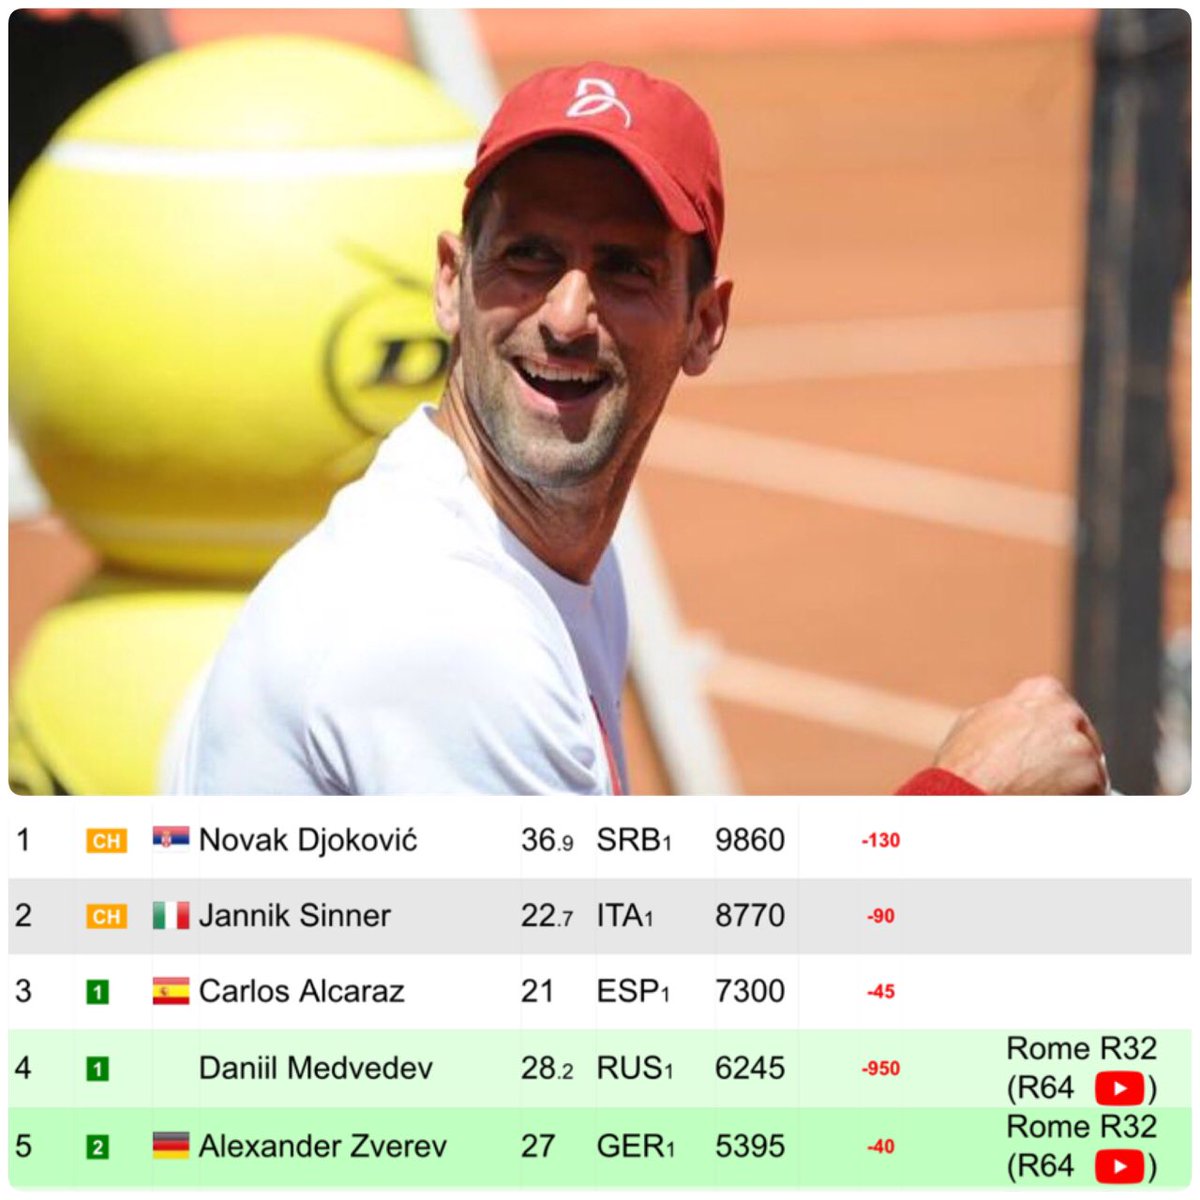 #NoleFam my dear friends .. 

Even though Nole lost today but our Nole ❤️ still holds the number one position in the world. 🌎 

🥰🥰🥰🥰🥰🥰🥰🥰🥰🥰🥰🥰🥰🥰🥰🥰🥰🥰🥰🥰🥰🥰🥰🥰